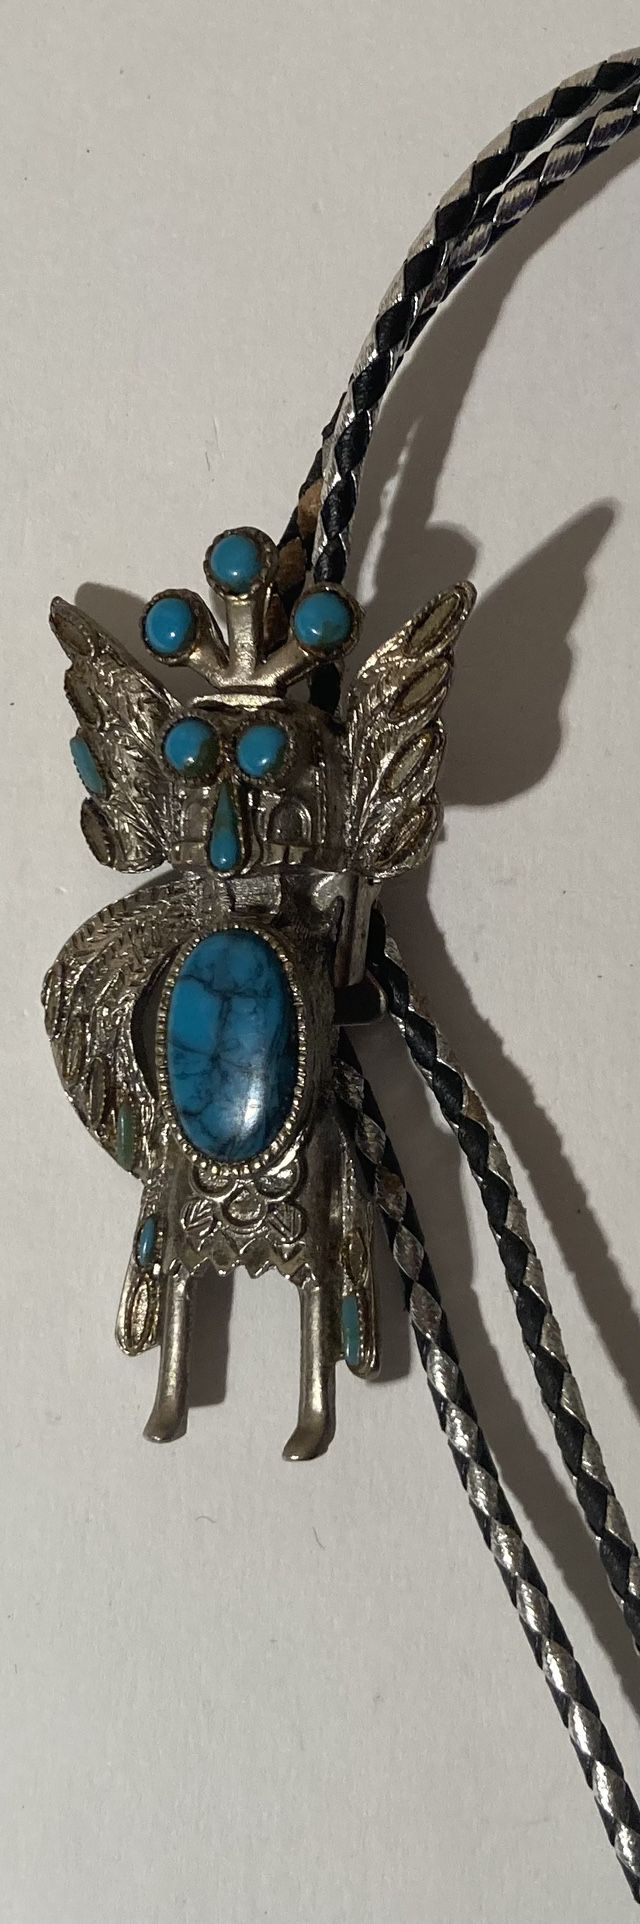 Vintage Bolo Tie Silver And Turquoise Native Design Quality